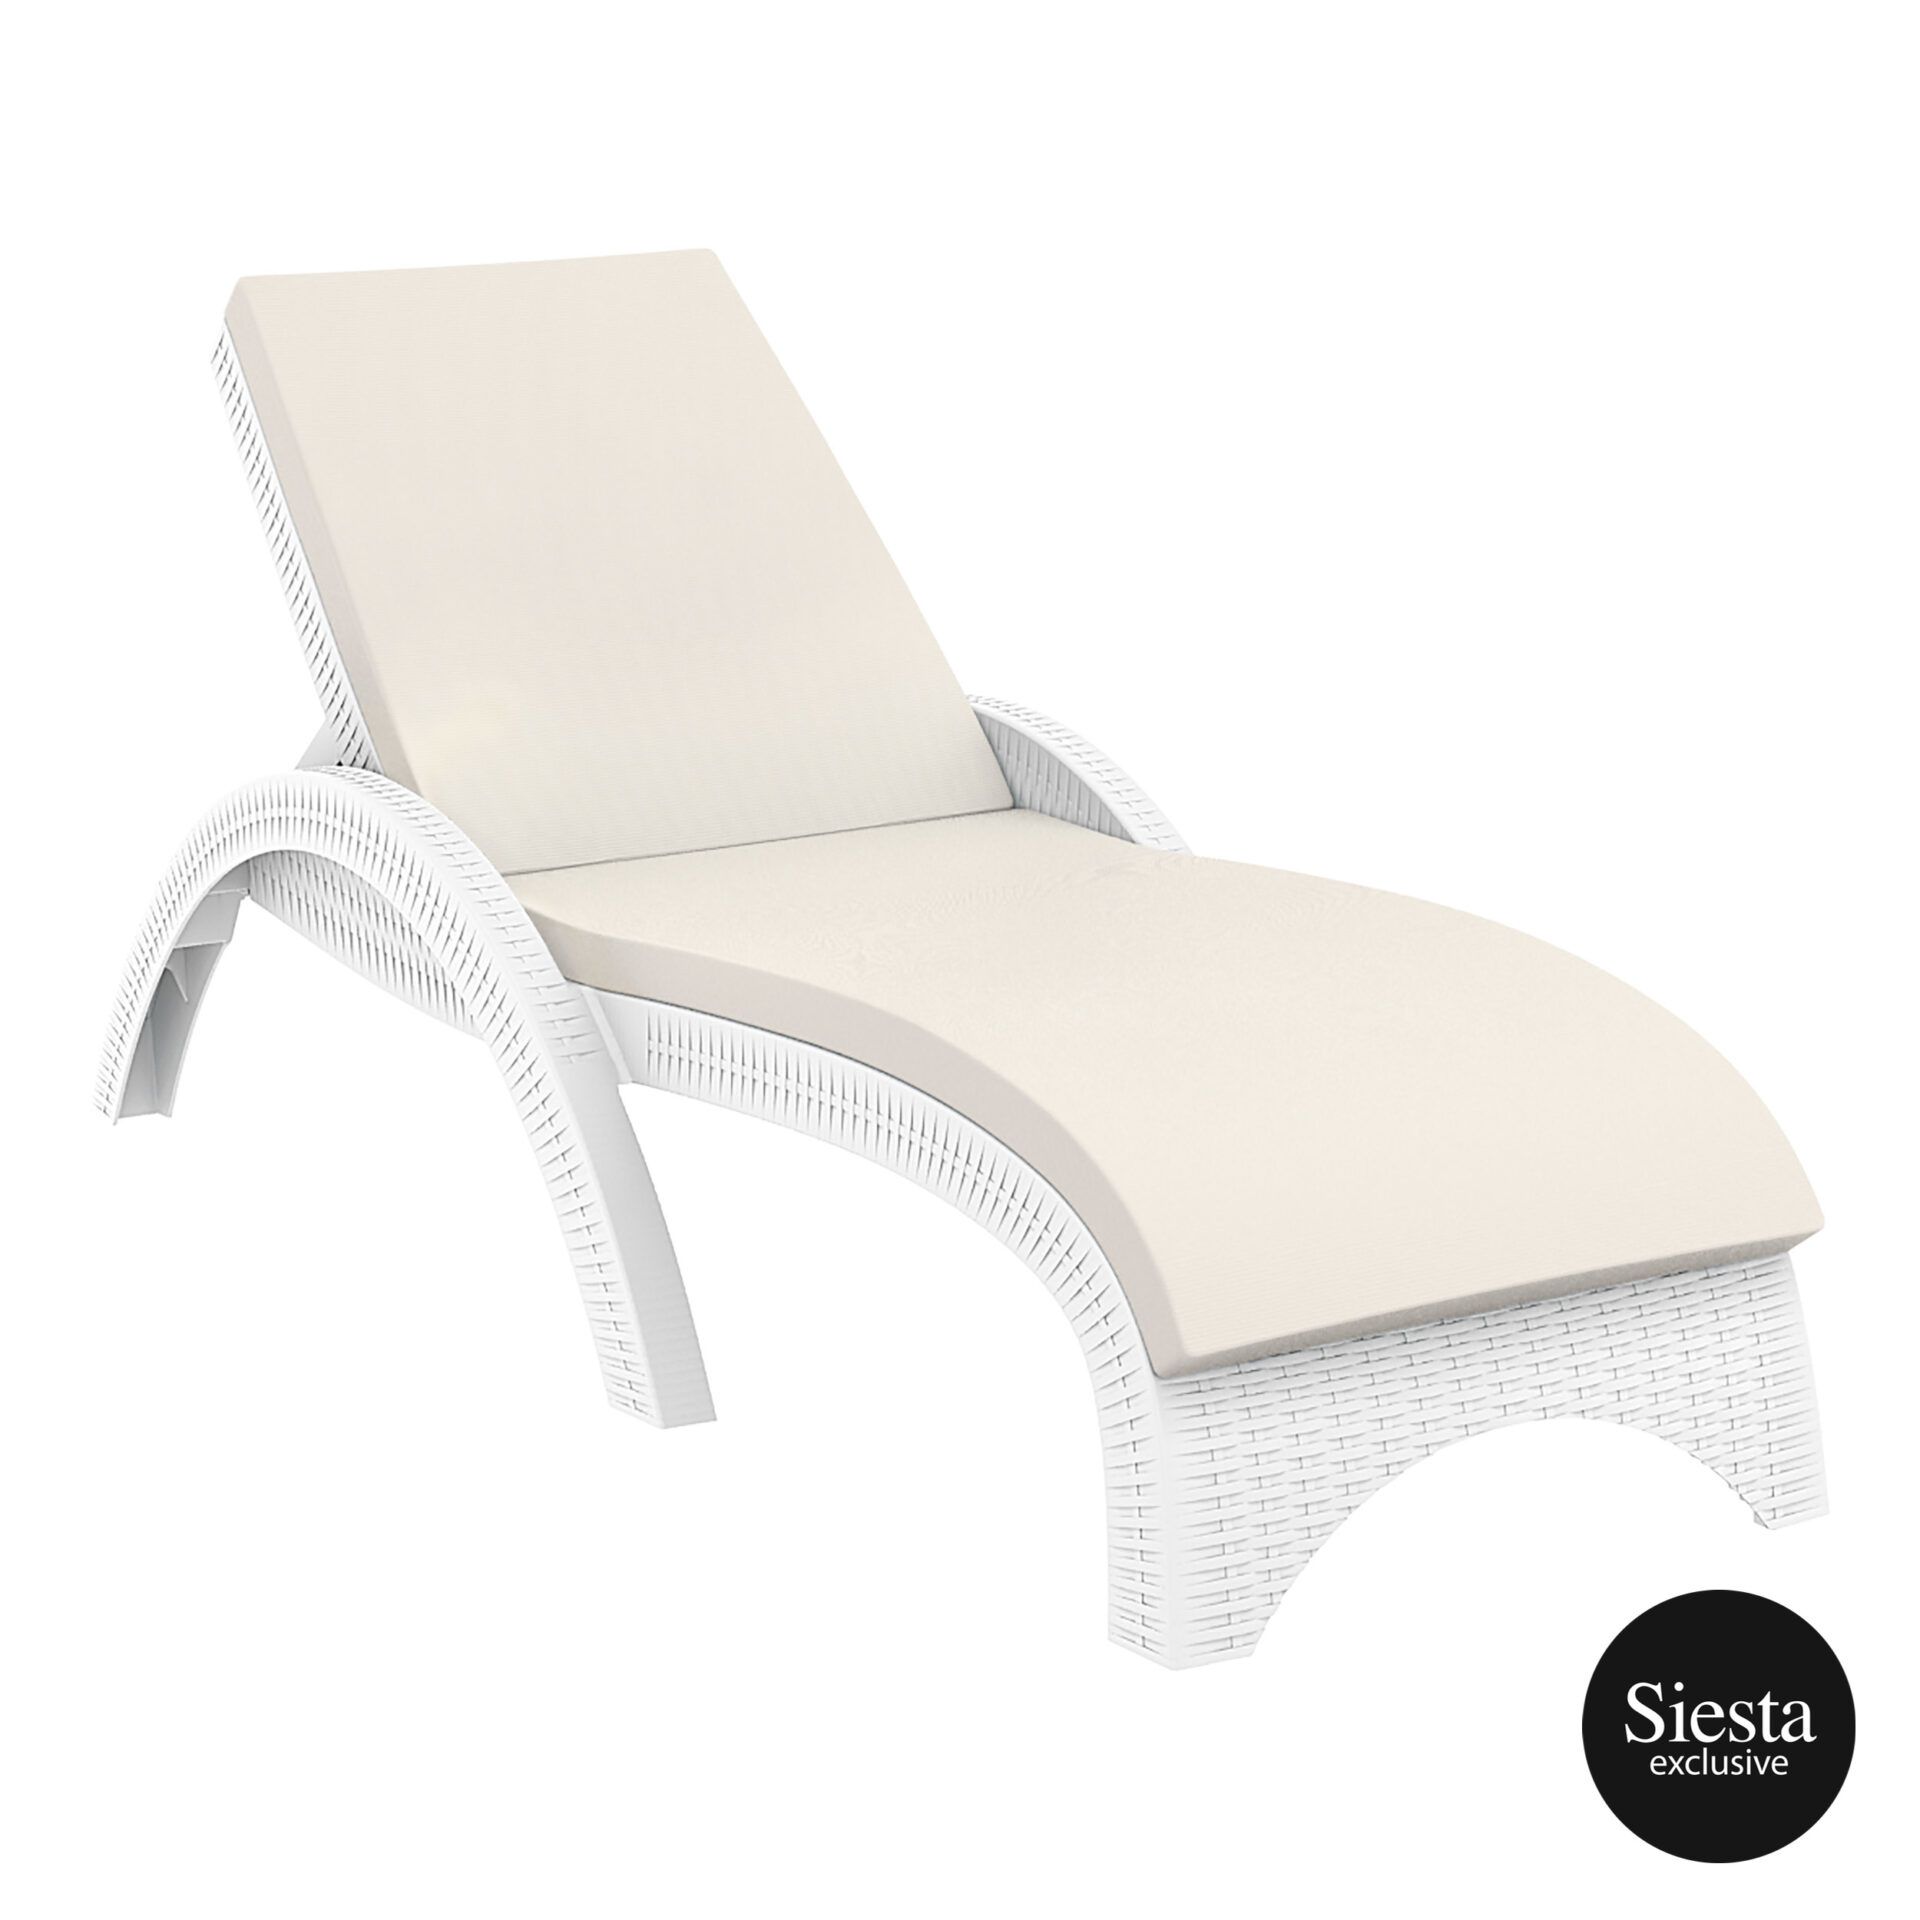 Outdoor Resin Rattan Fiji Sunlounger Cushion white front side